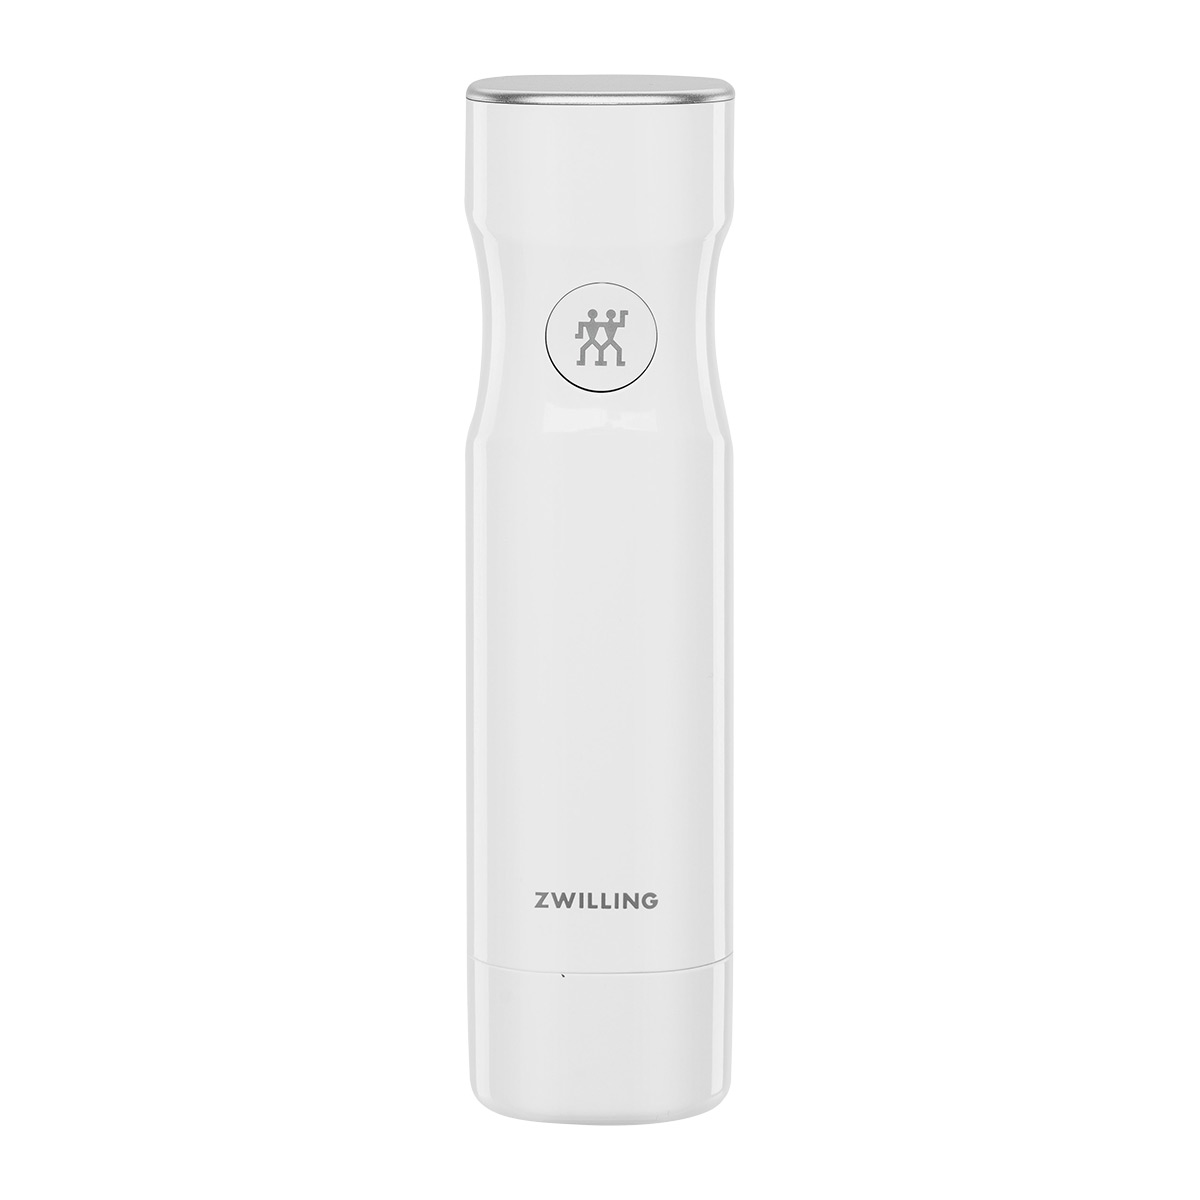 https://www.containerstore.com/catalogimages/490544/10095116-36801-000_1-zwilling-vacuum.jpg